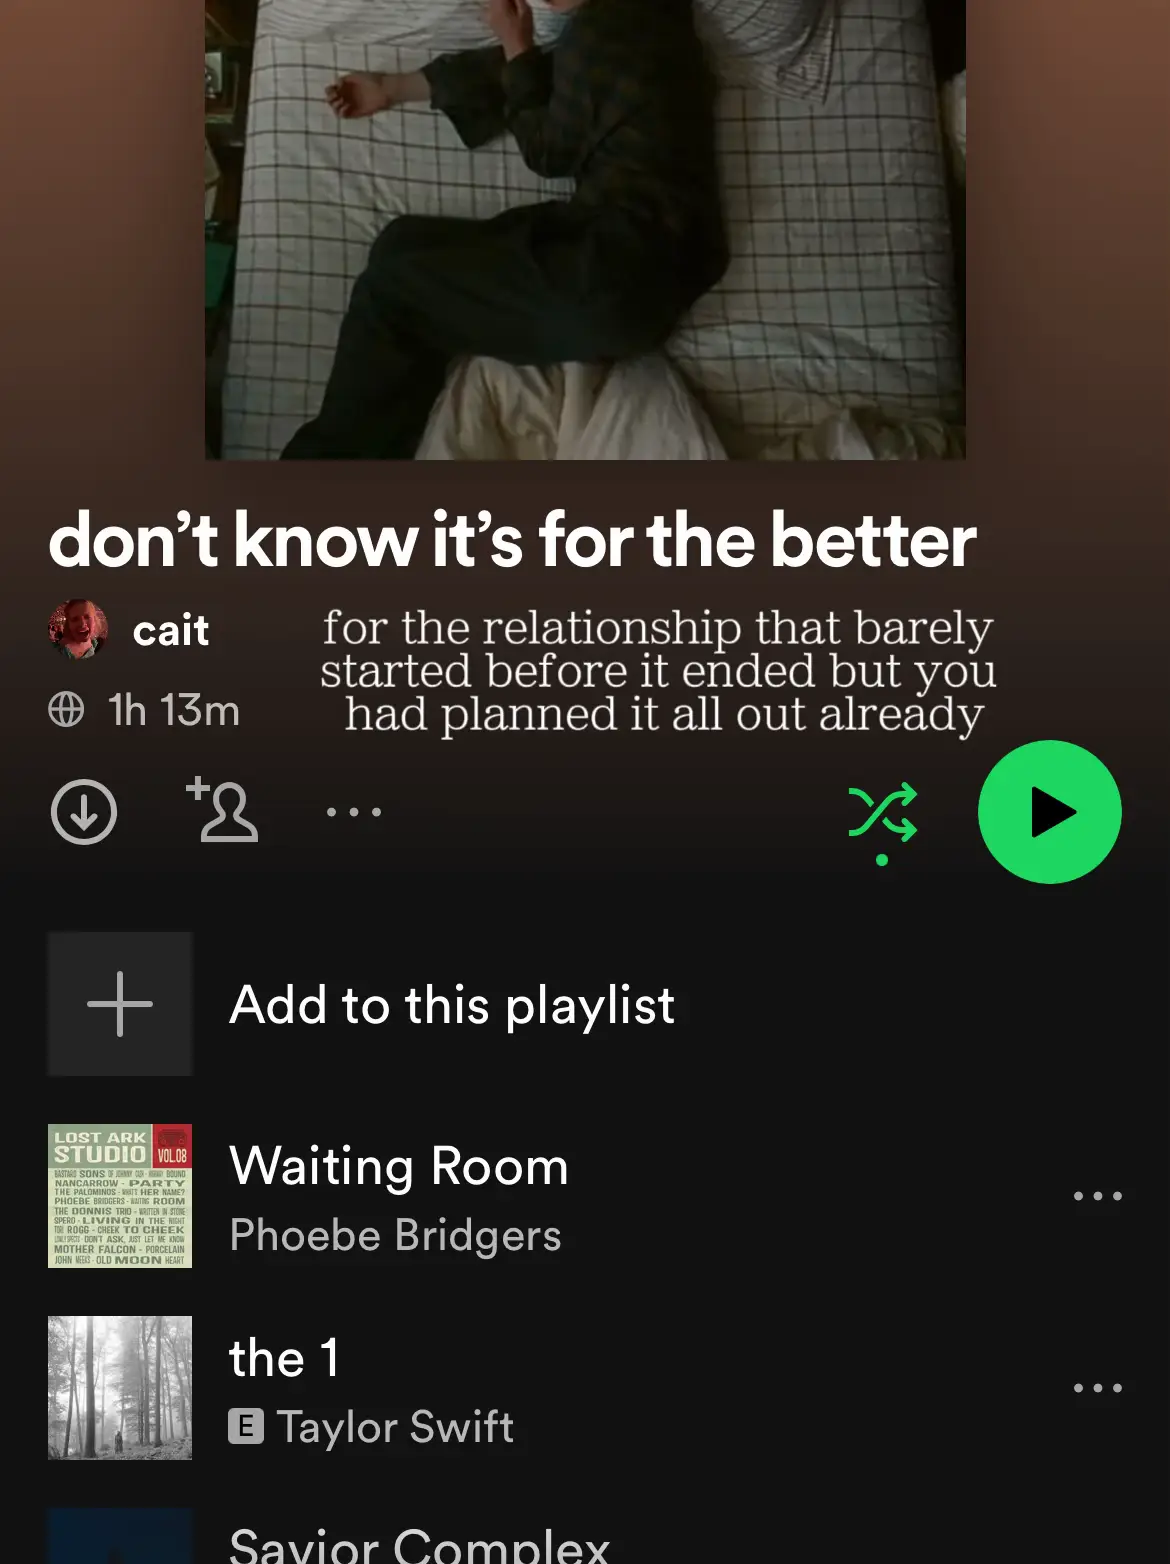  A playlist of Taylor Swift and Phoebe Bridgers